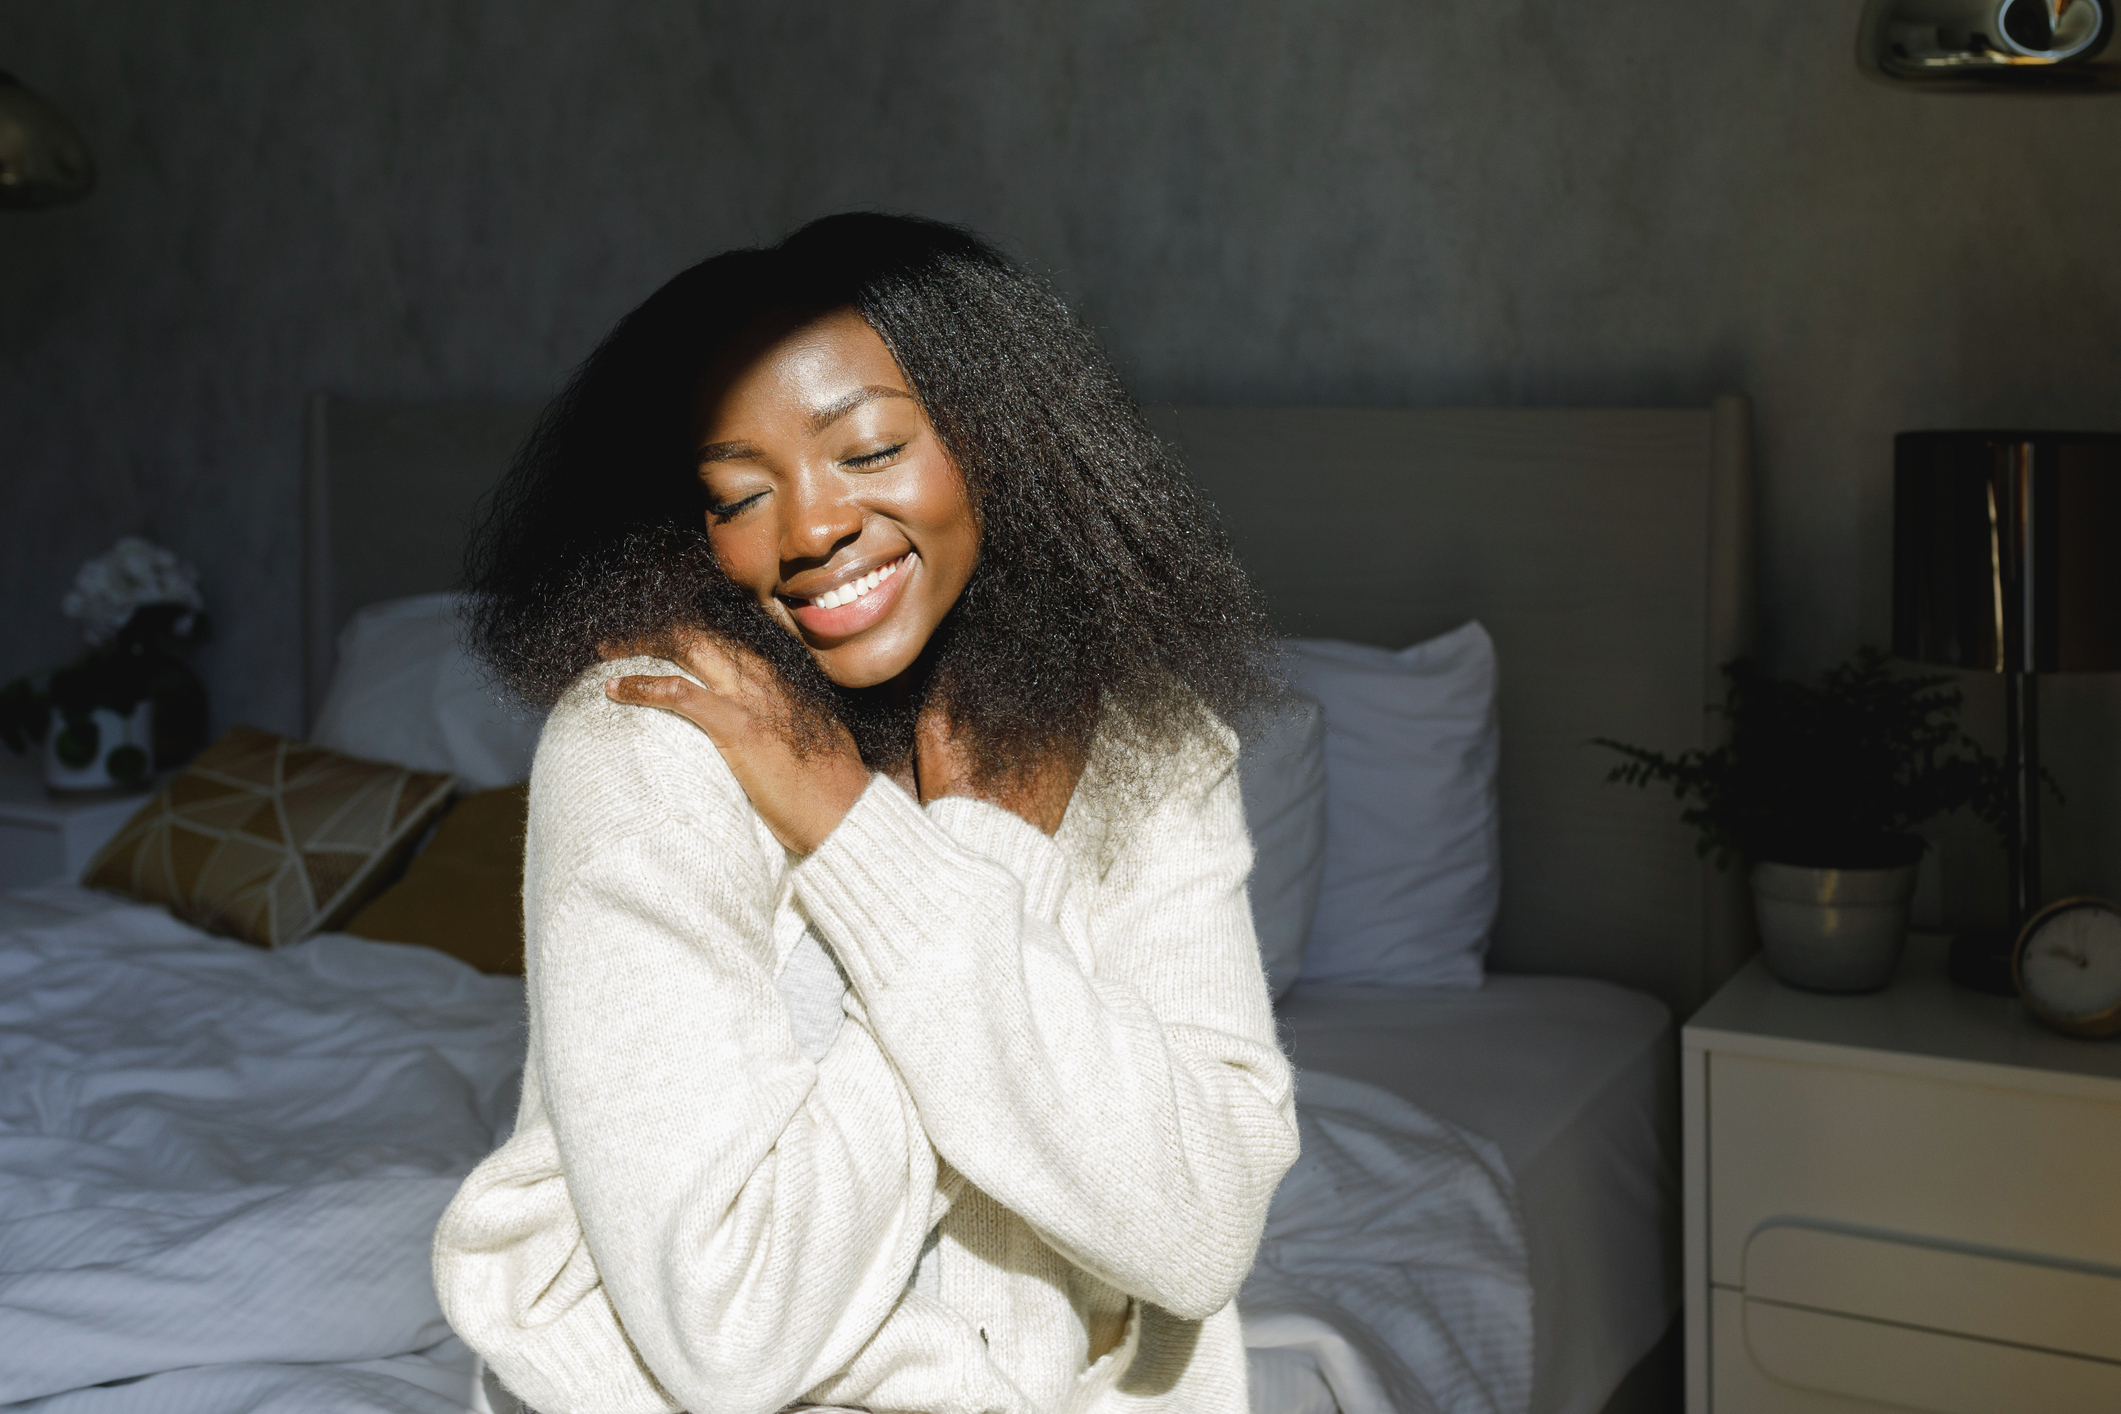 A woman in a knit sweater smiling with eyes closed, embracing herself in cozy bedroom setting